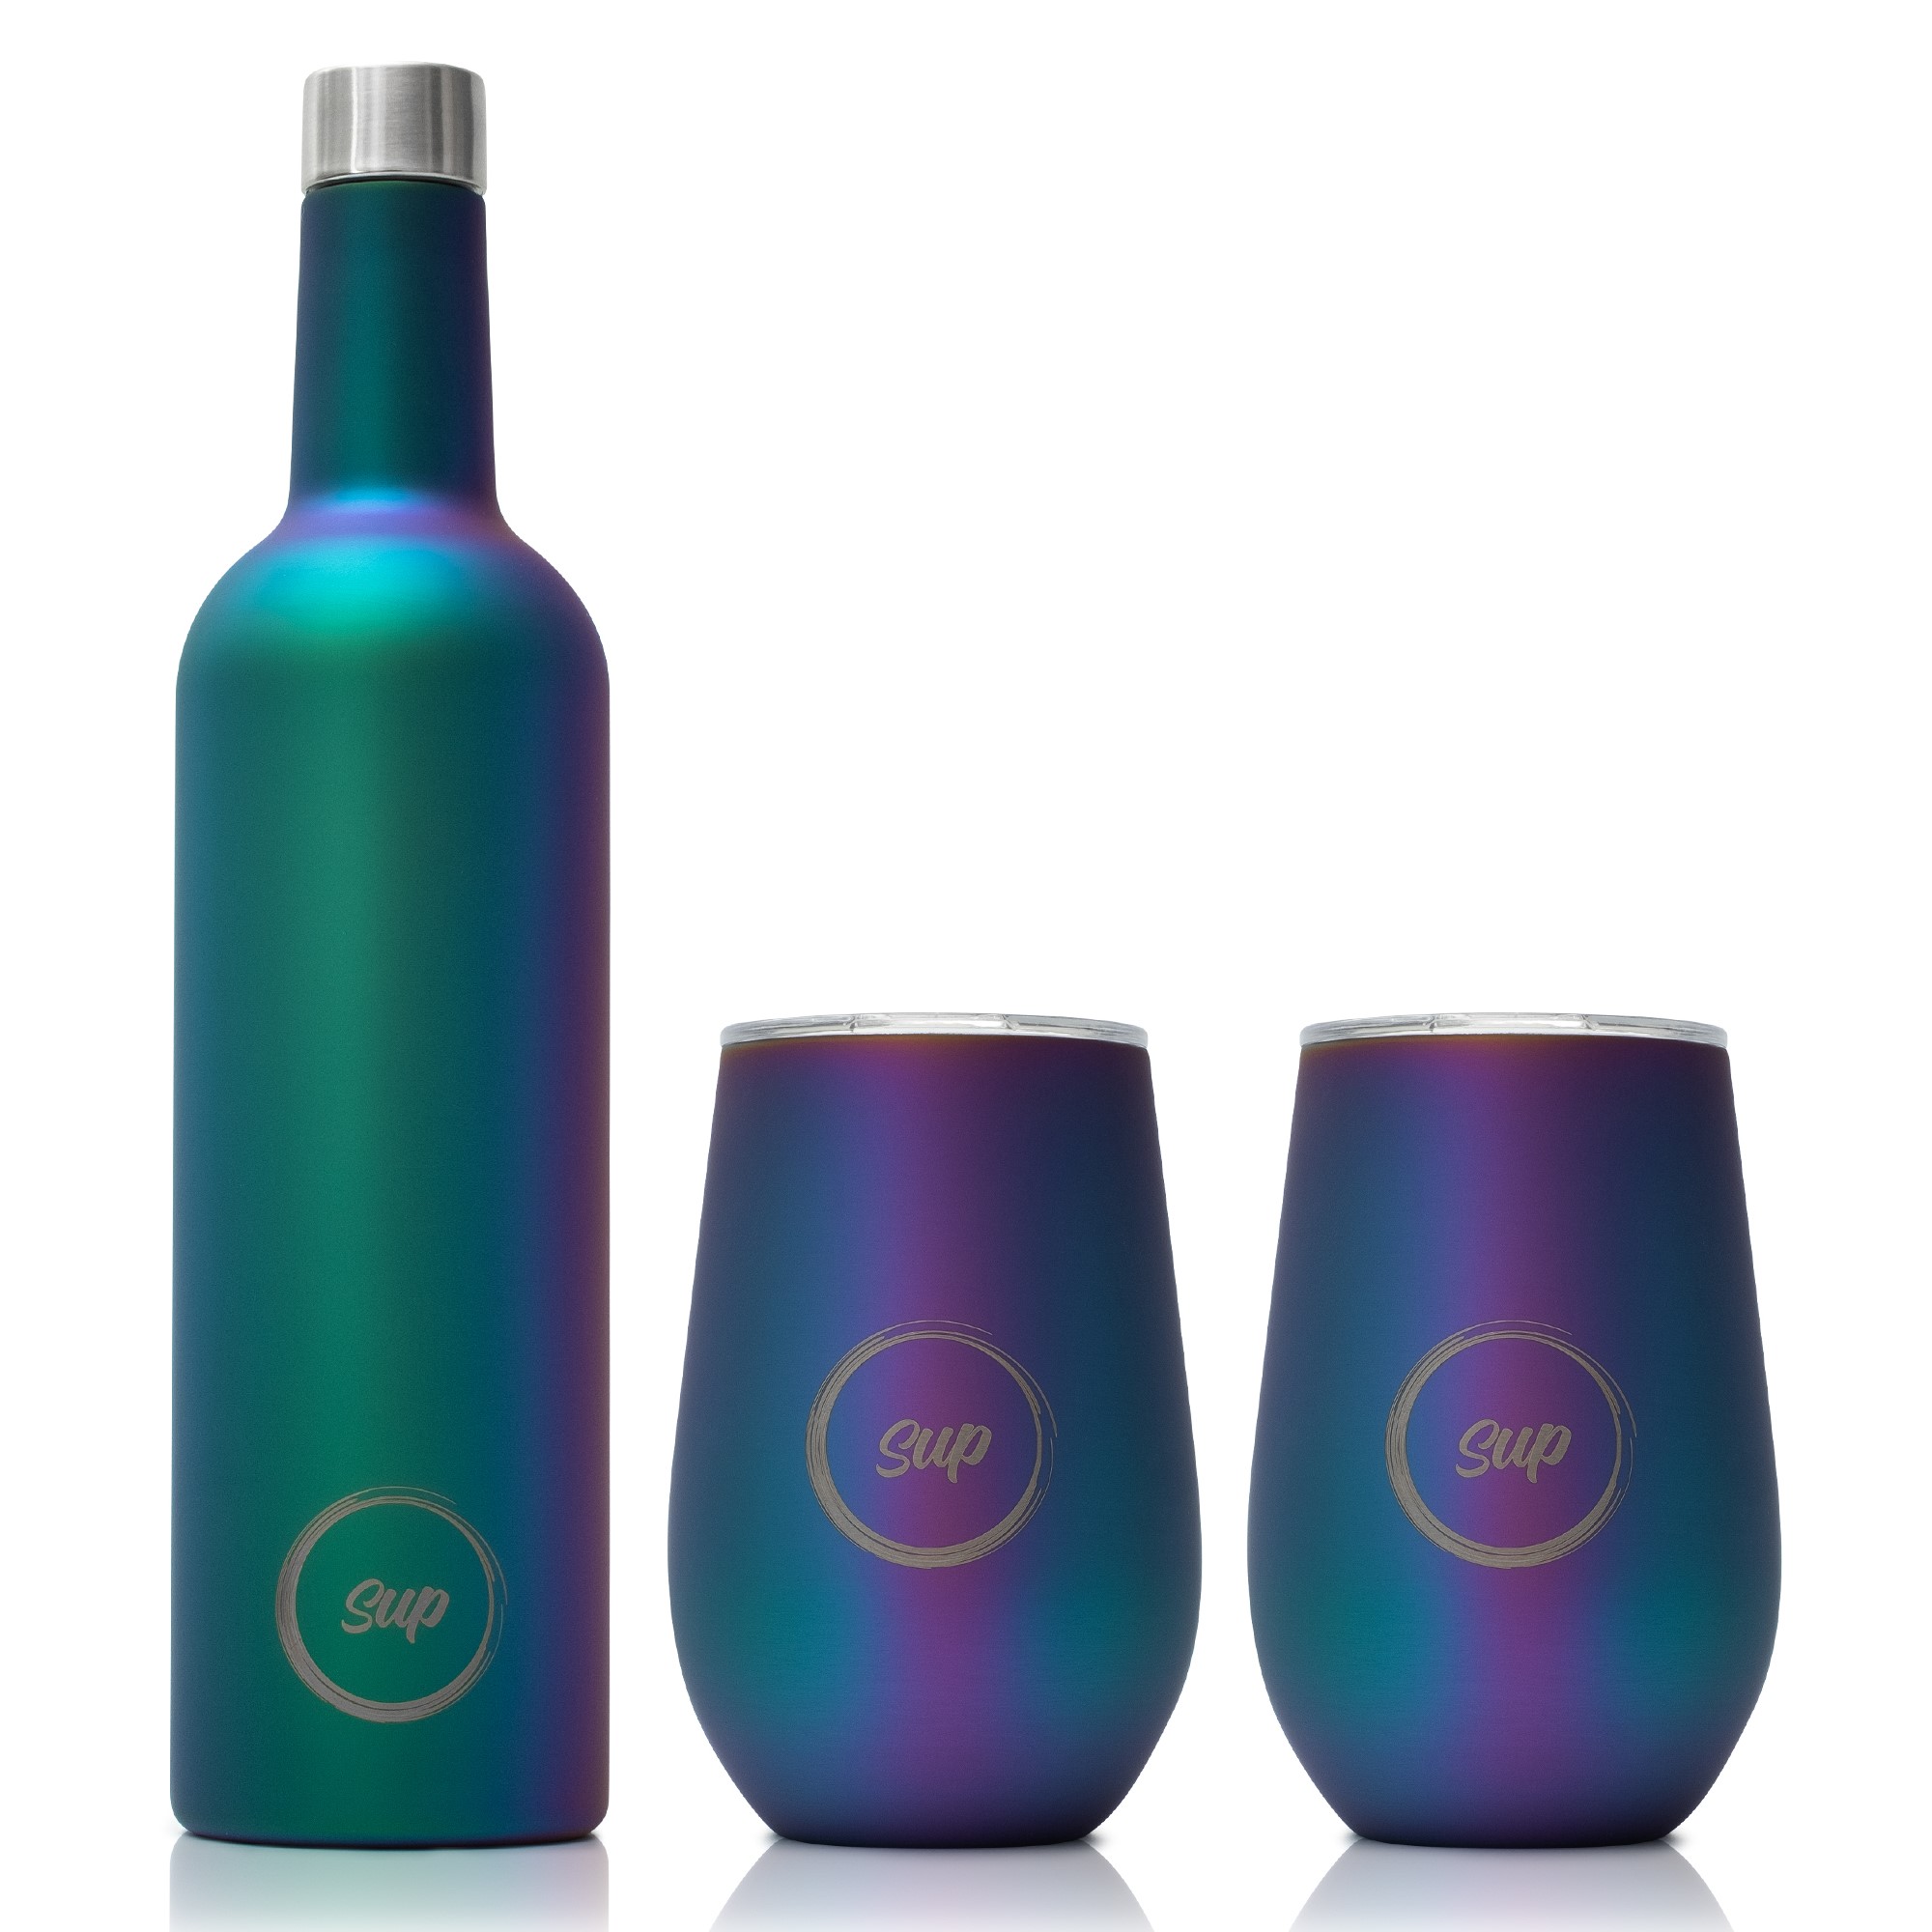 Insulated-wine-bottle-tumbler-gift-set-peacock-galaxy-sup